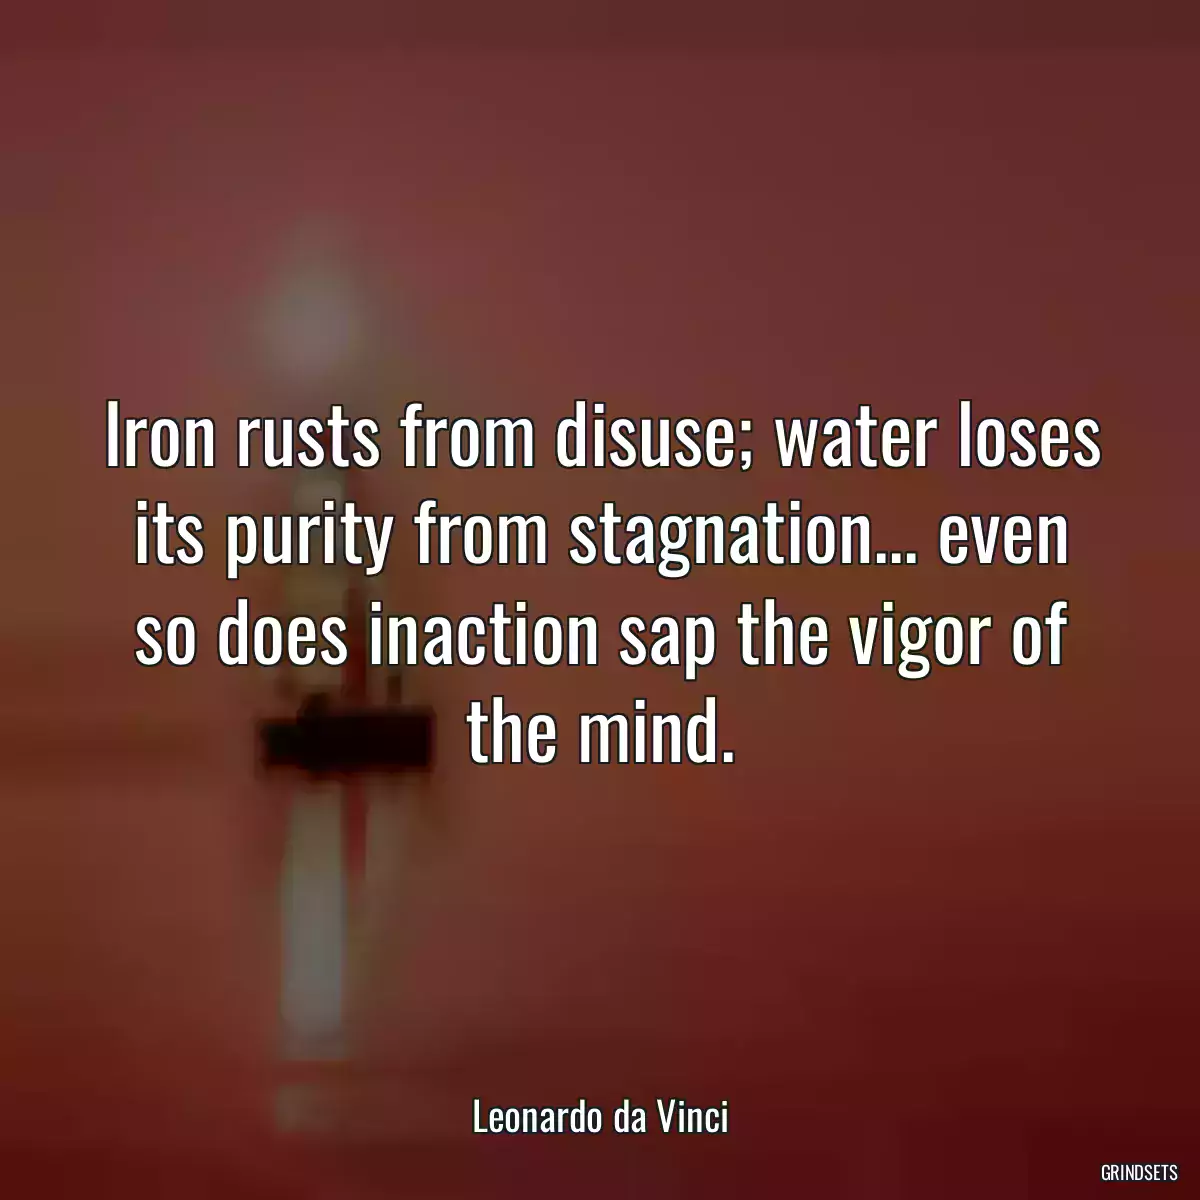 Iron rusts from disuse; water loses its purity from stagnation... even so does inaction sap the vigor of the mind.